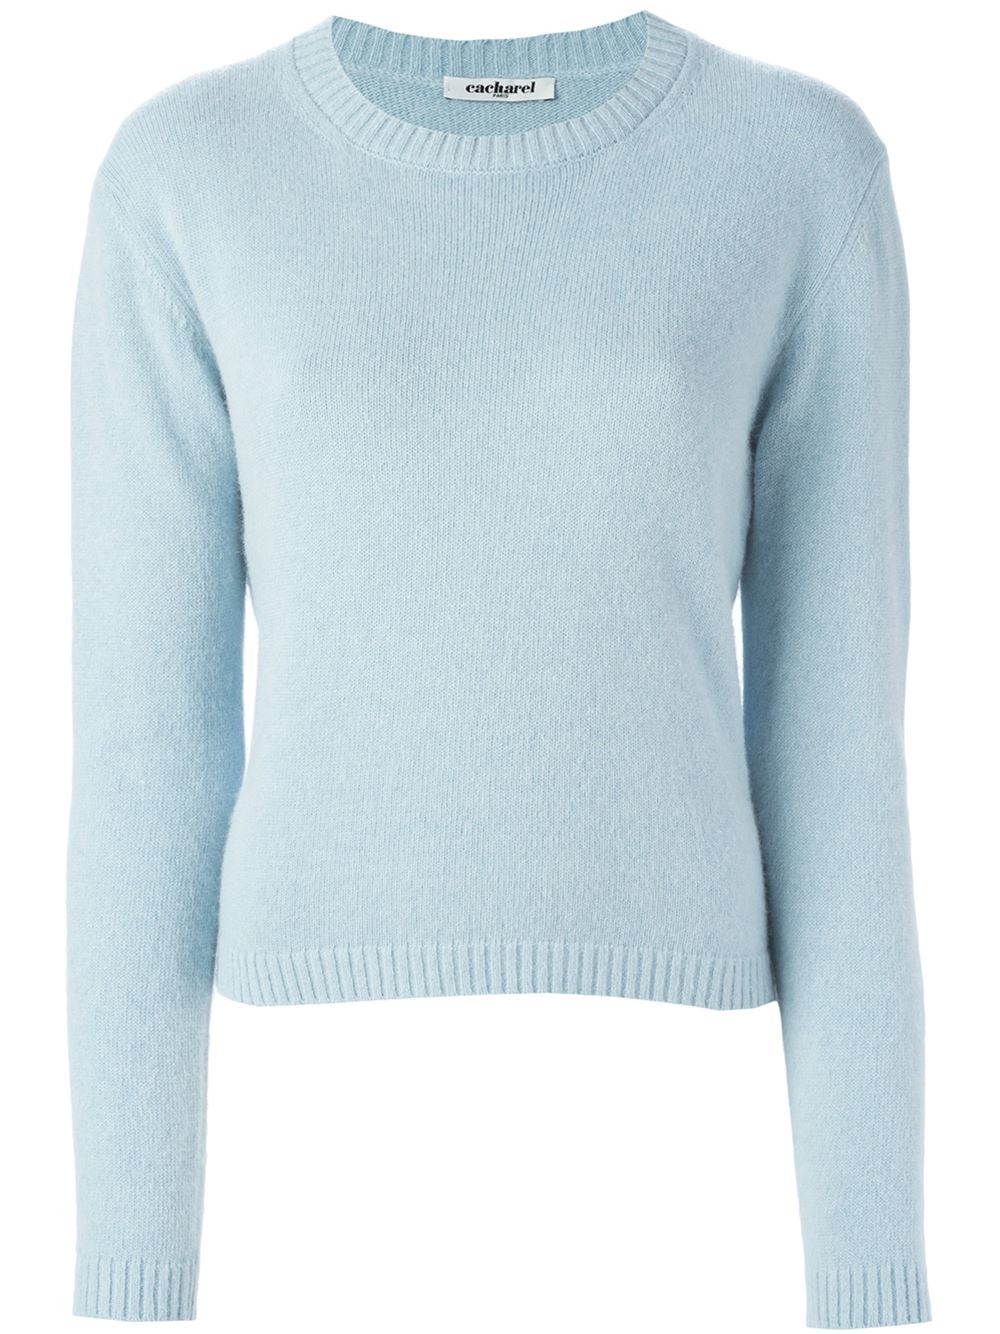 Cacharel Cropped Sweater in Blue | Lyst